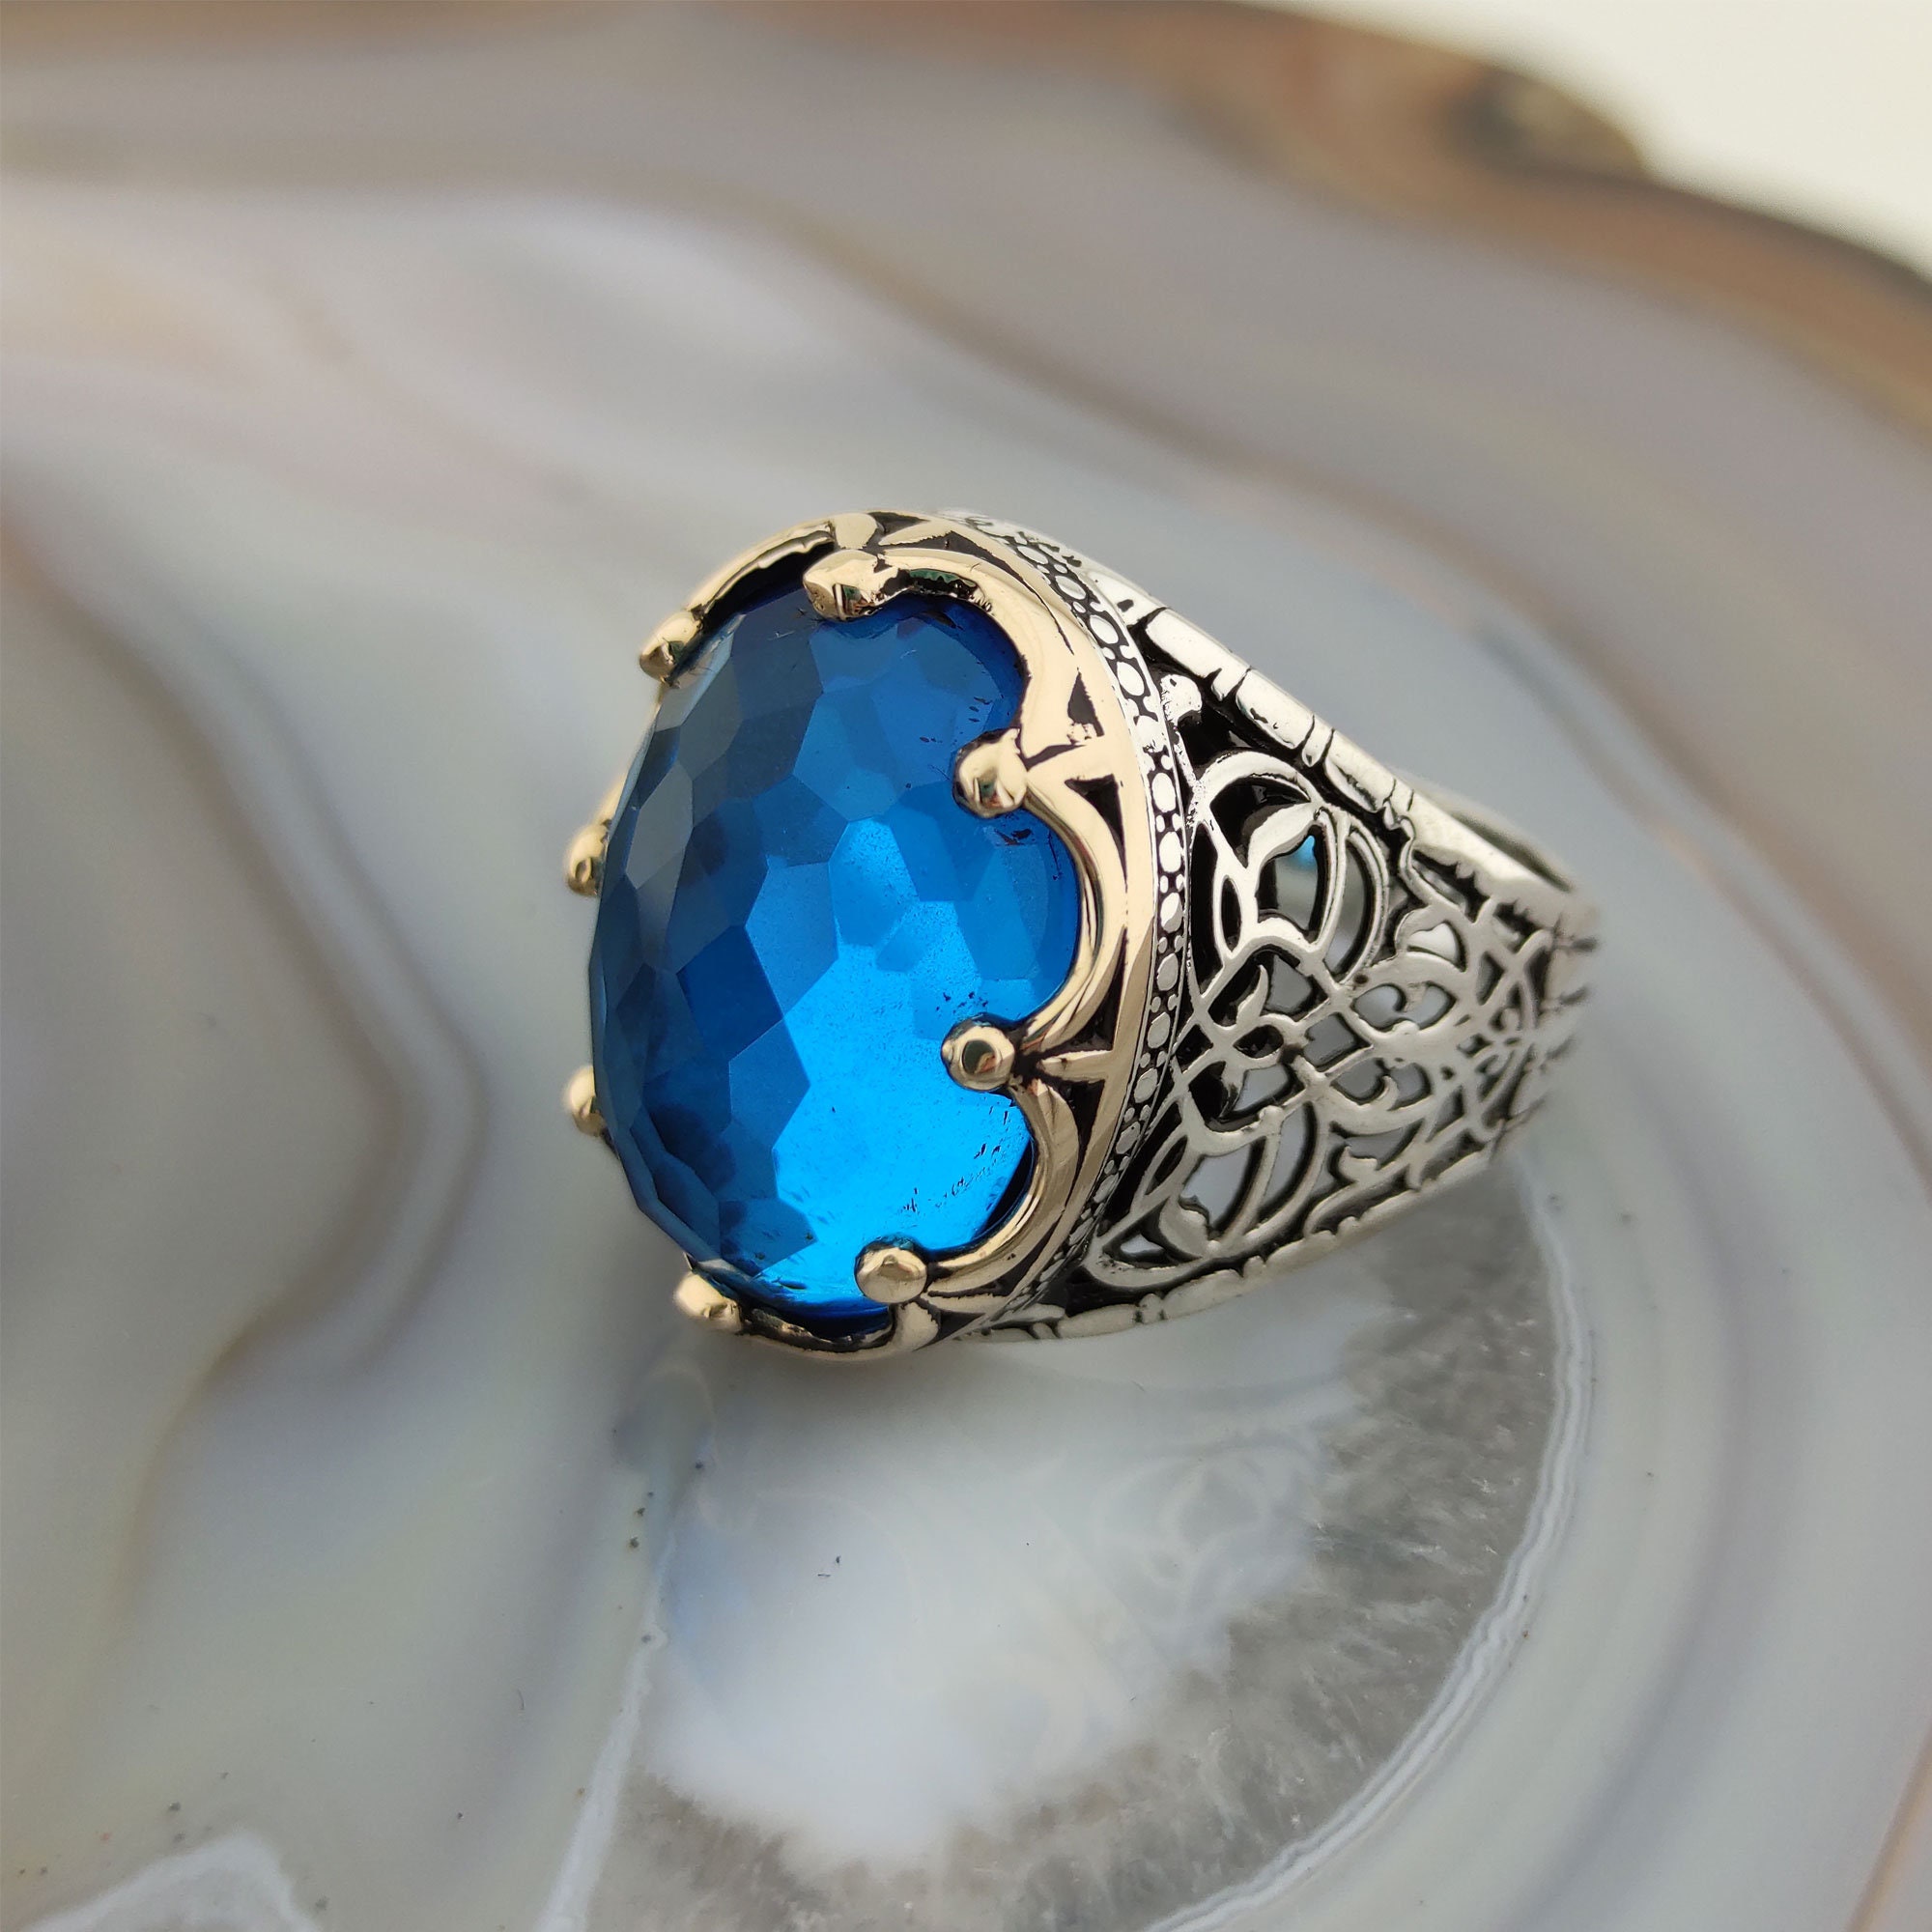 Medusa Lapis Adjustable Sterling Silver Ring | Fair Anita | Ethical Jewelry  |